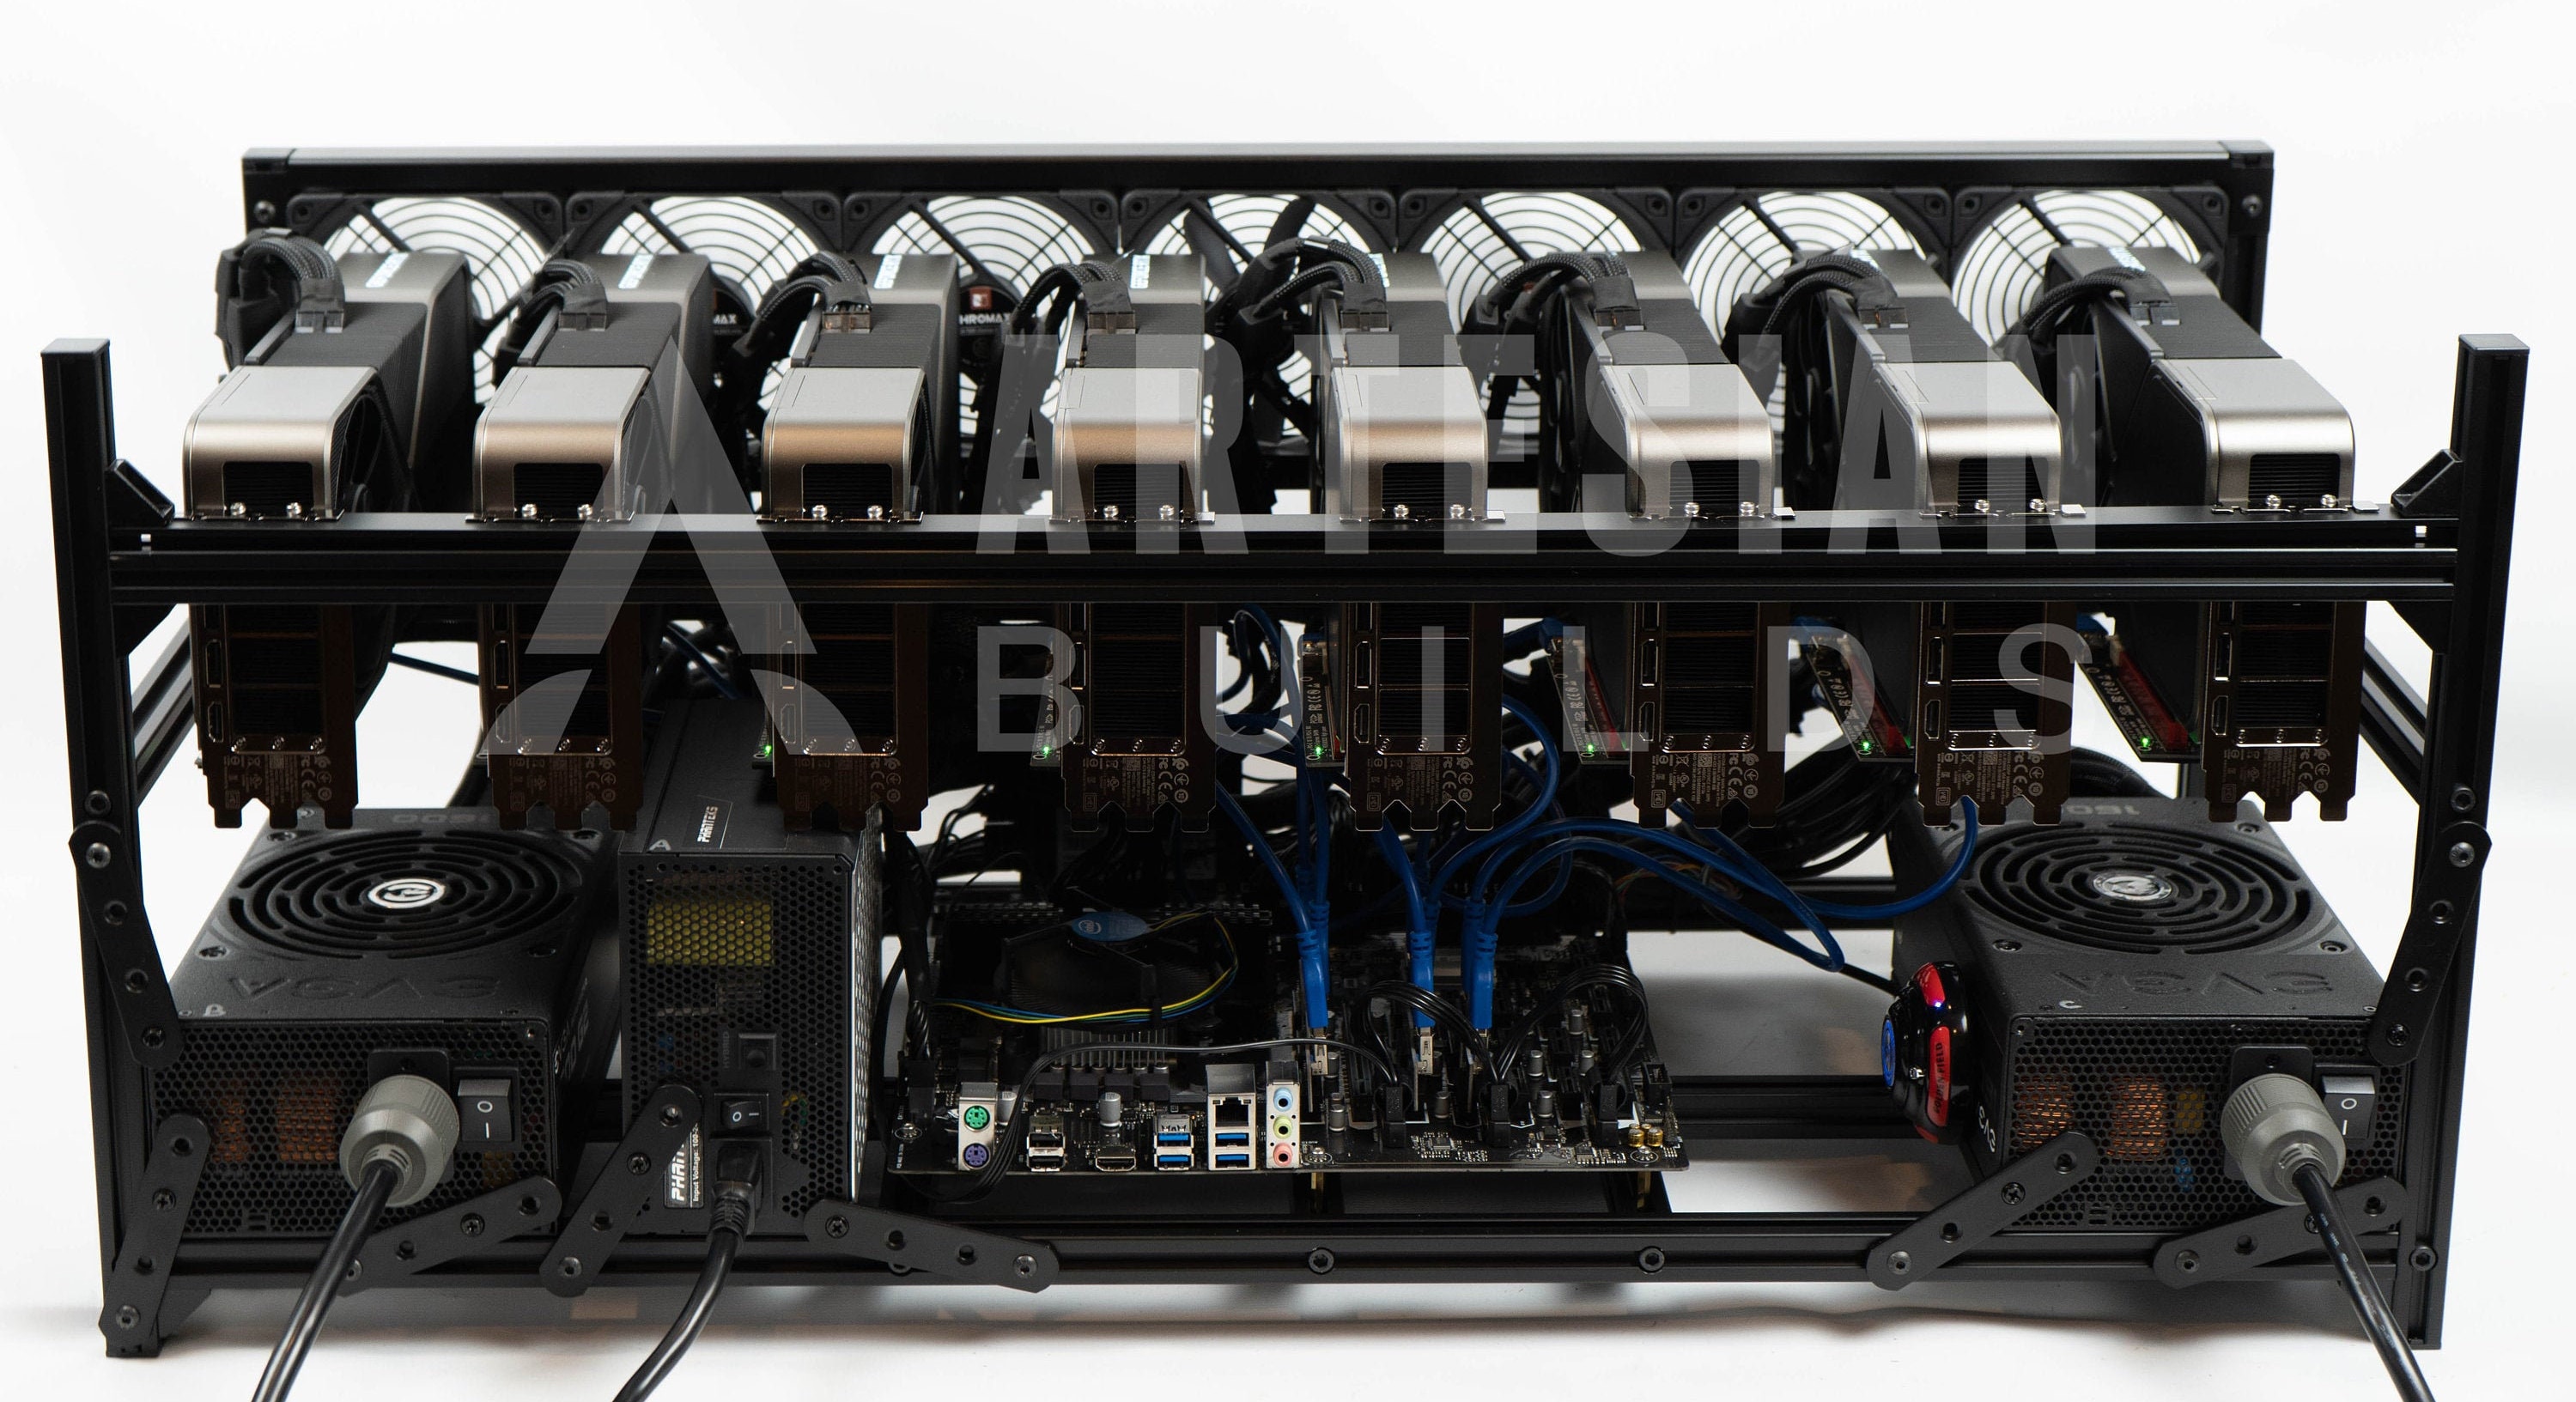 Diy ethereum mining rig frame d2 can rare be ethereal socket